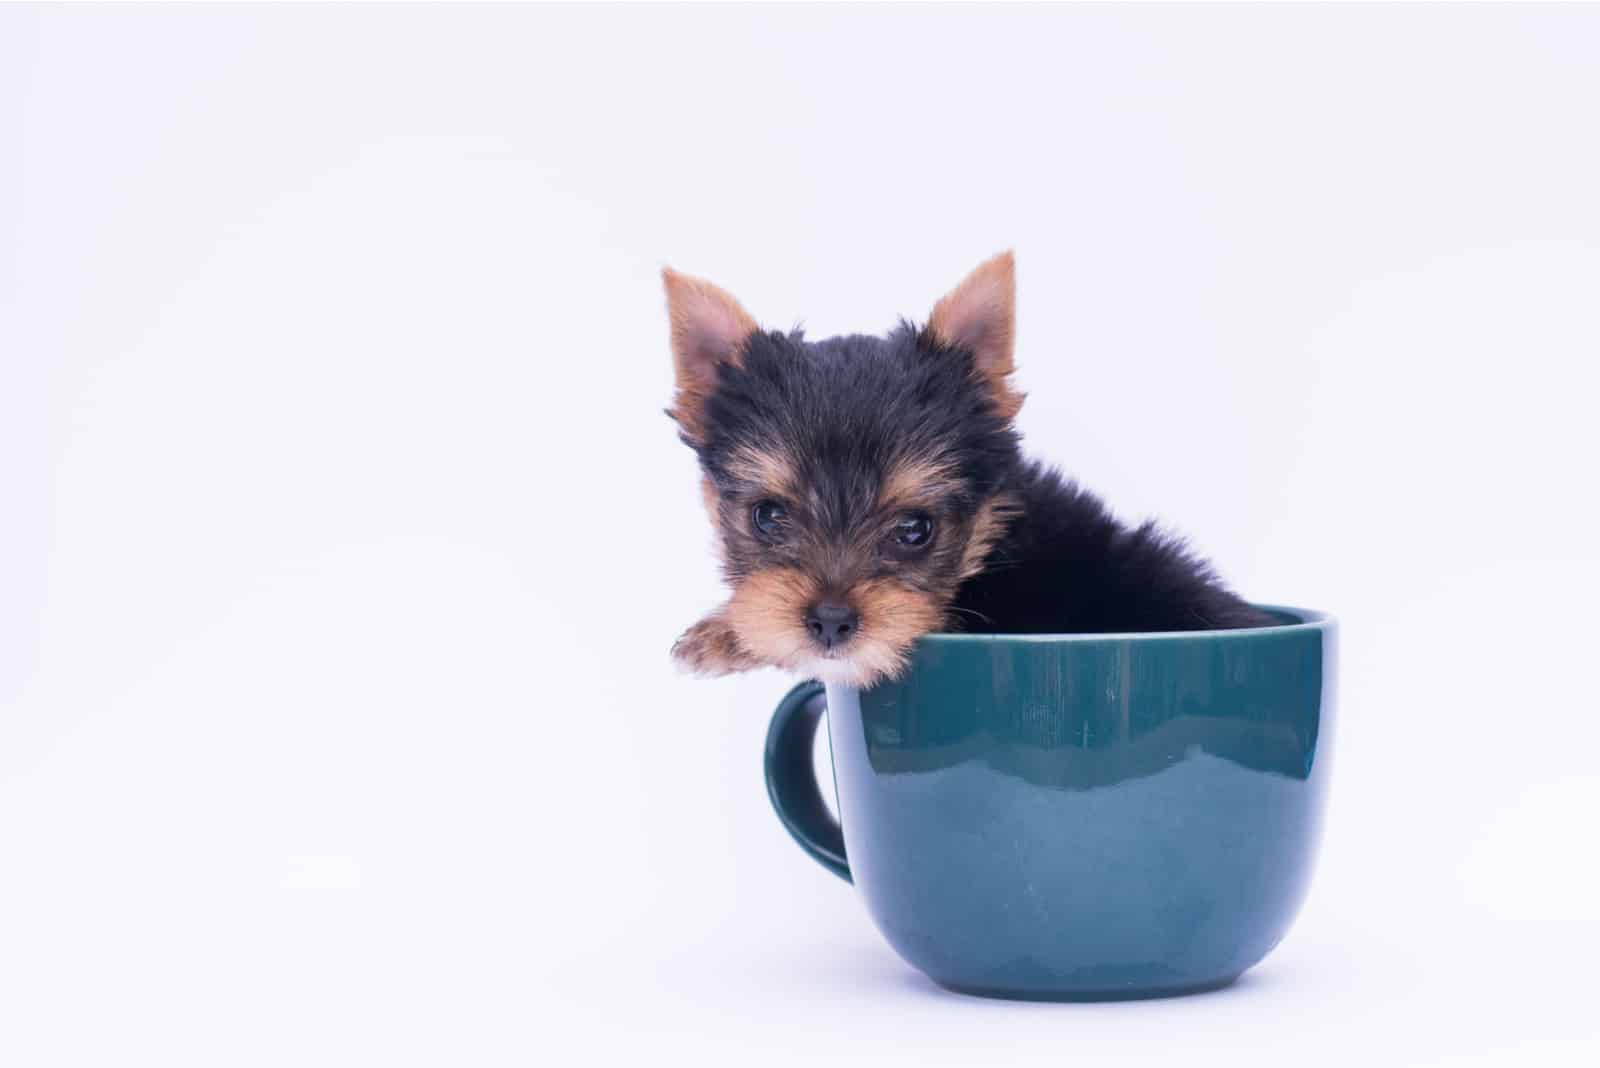 teacup yorkie in a cup